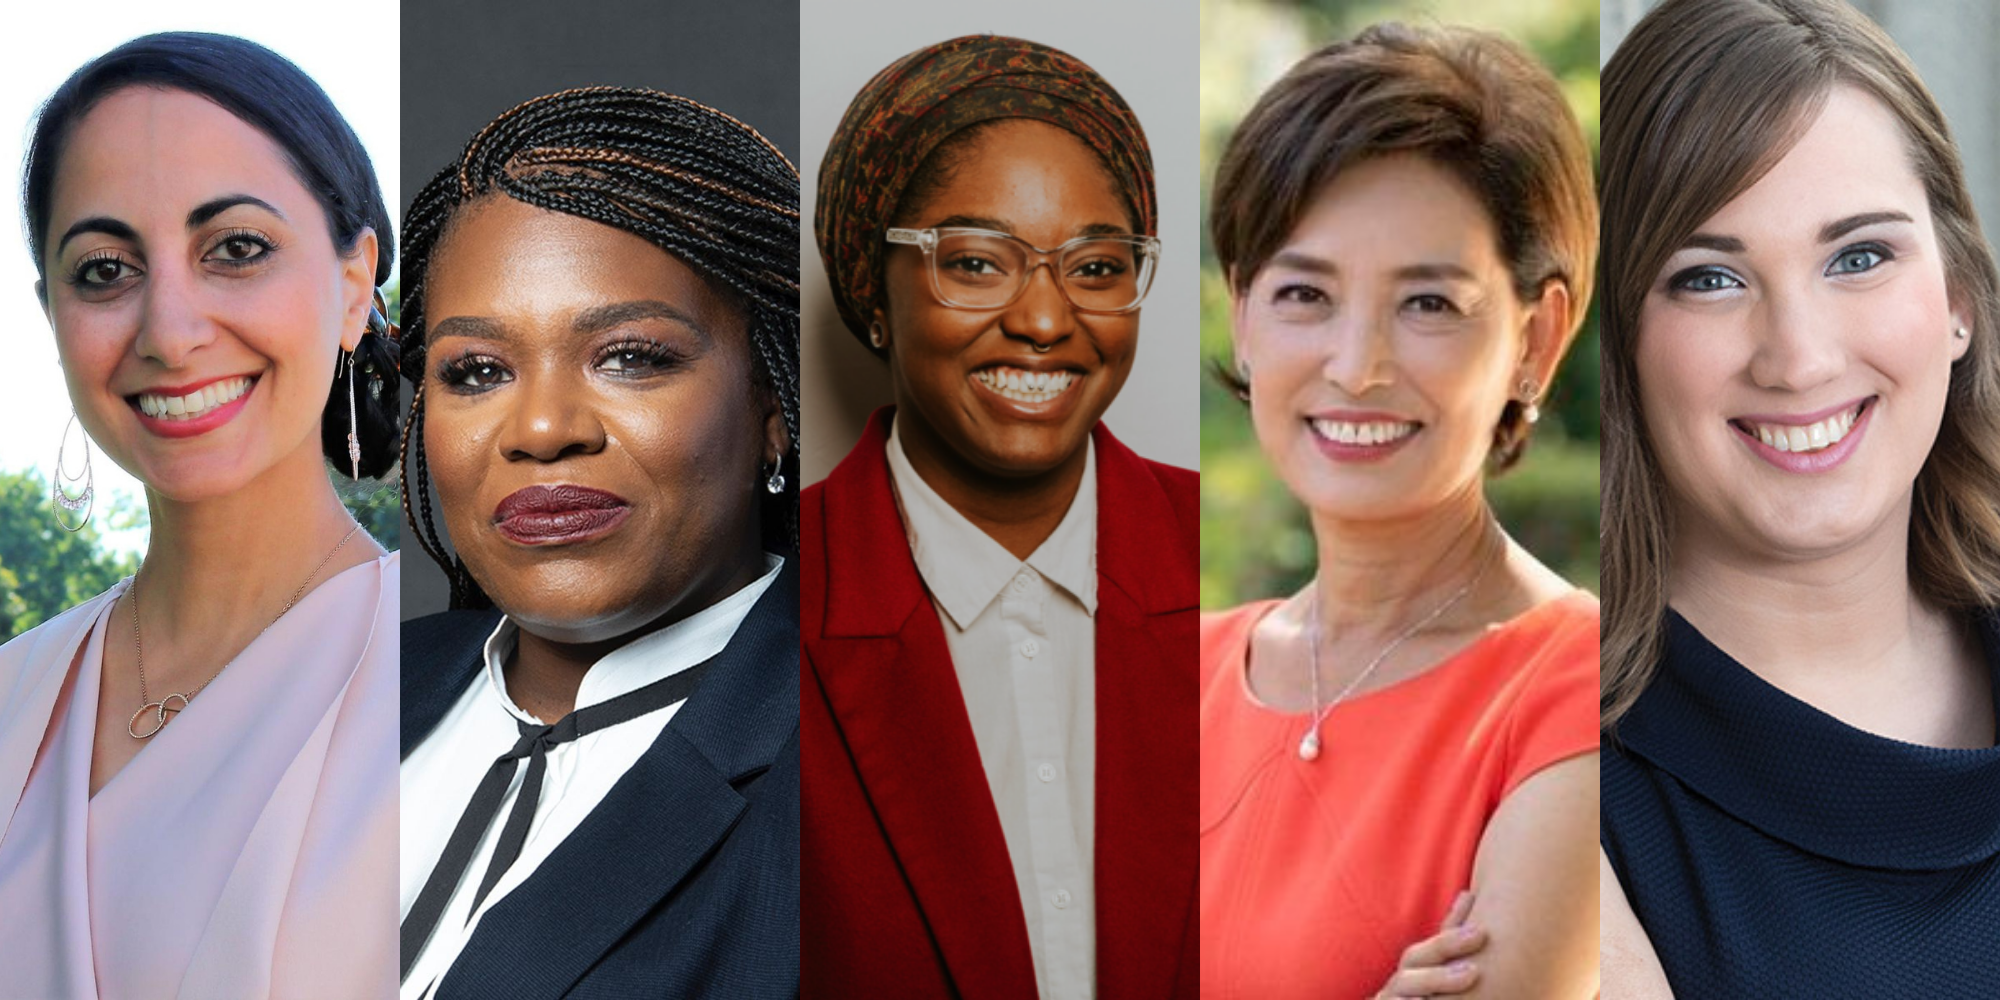 The womxn who just made history ignite national election 2020